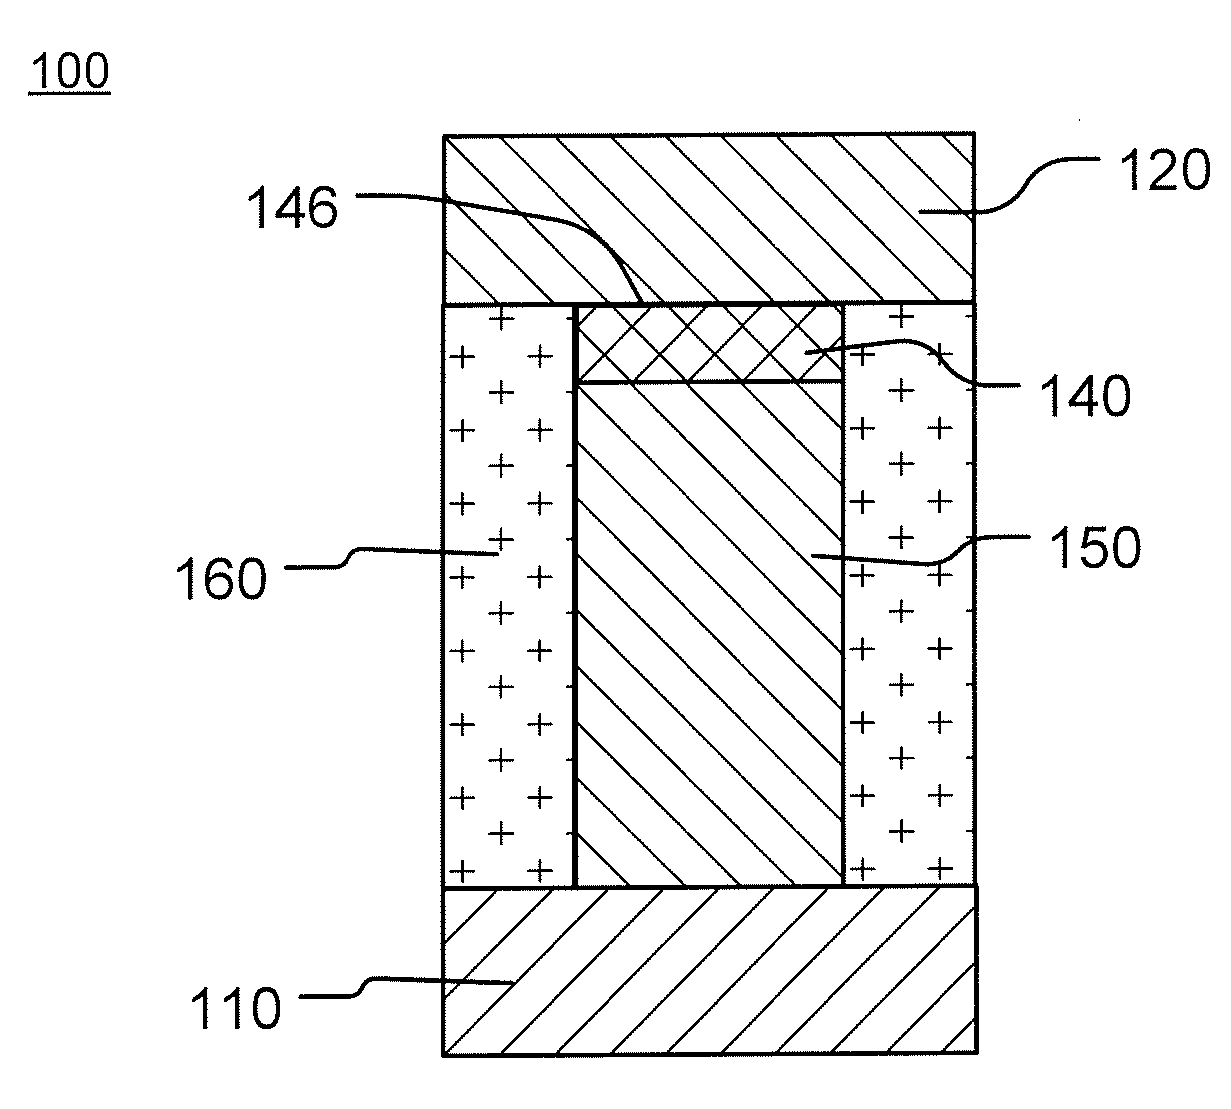 Operating method of electrical pulse voltage for rram application